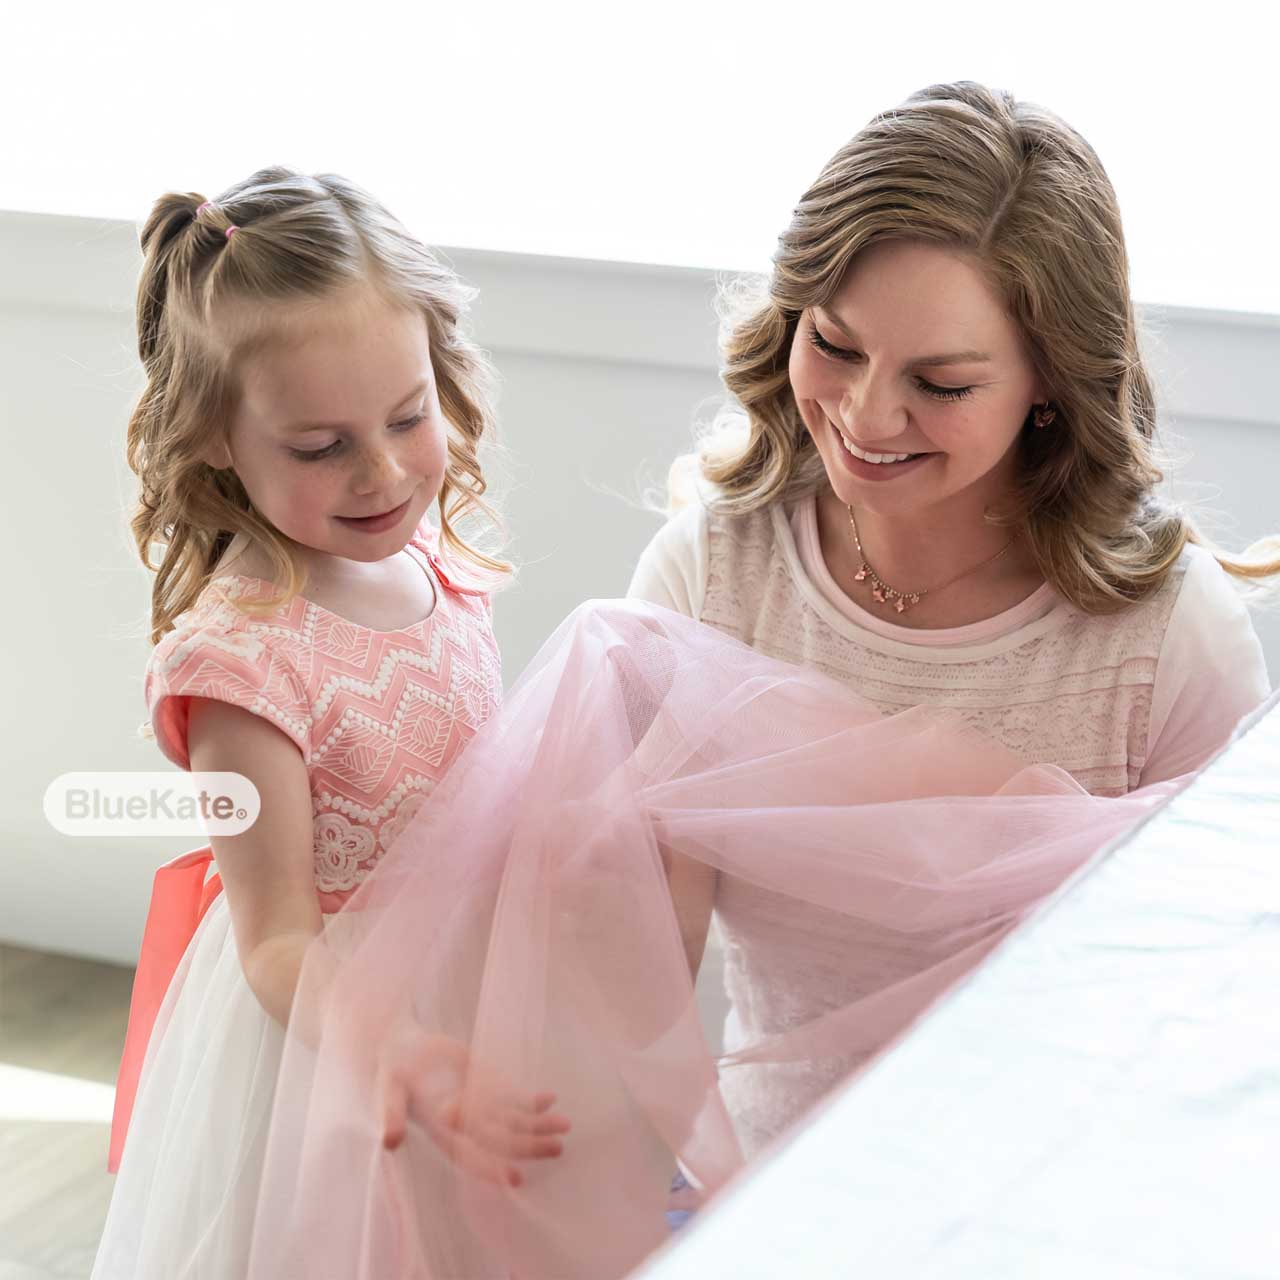 Pastel Rainbow Tulle Tutu Table Skirt Size: 14 ft | Wedding | Event | Wholesale by CV Linens